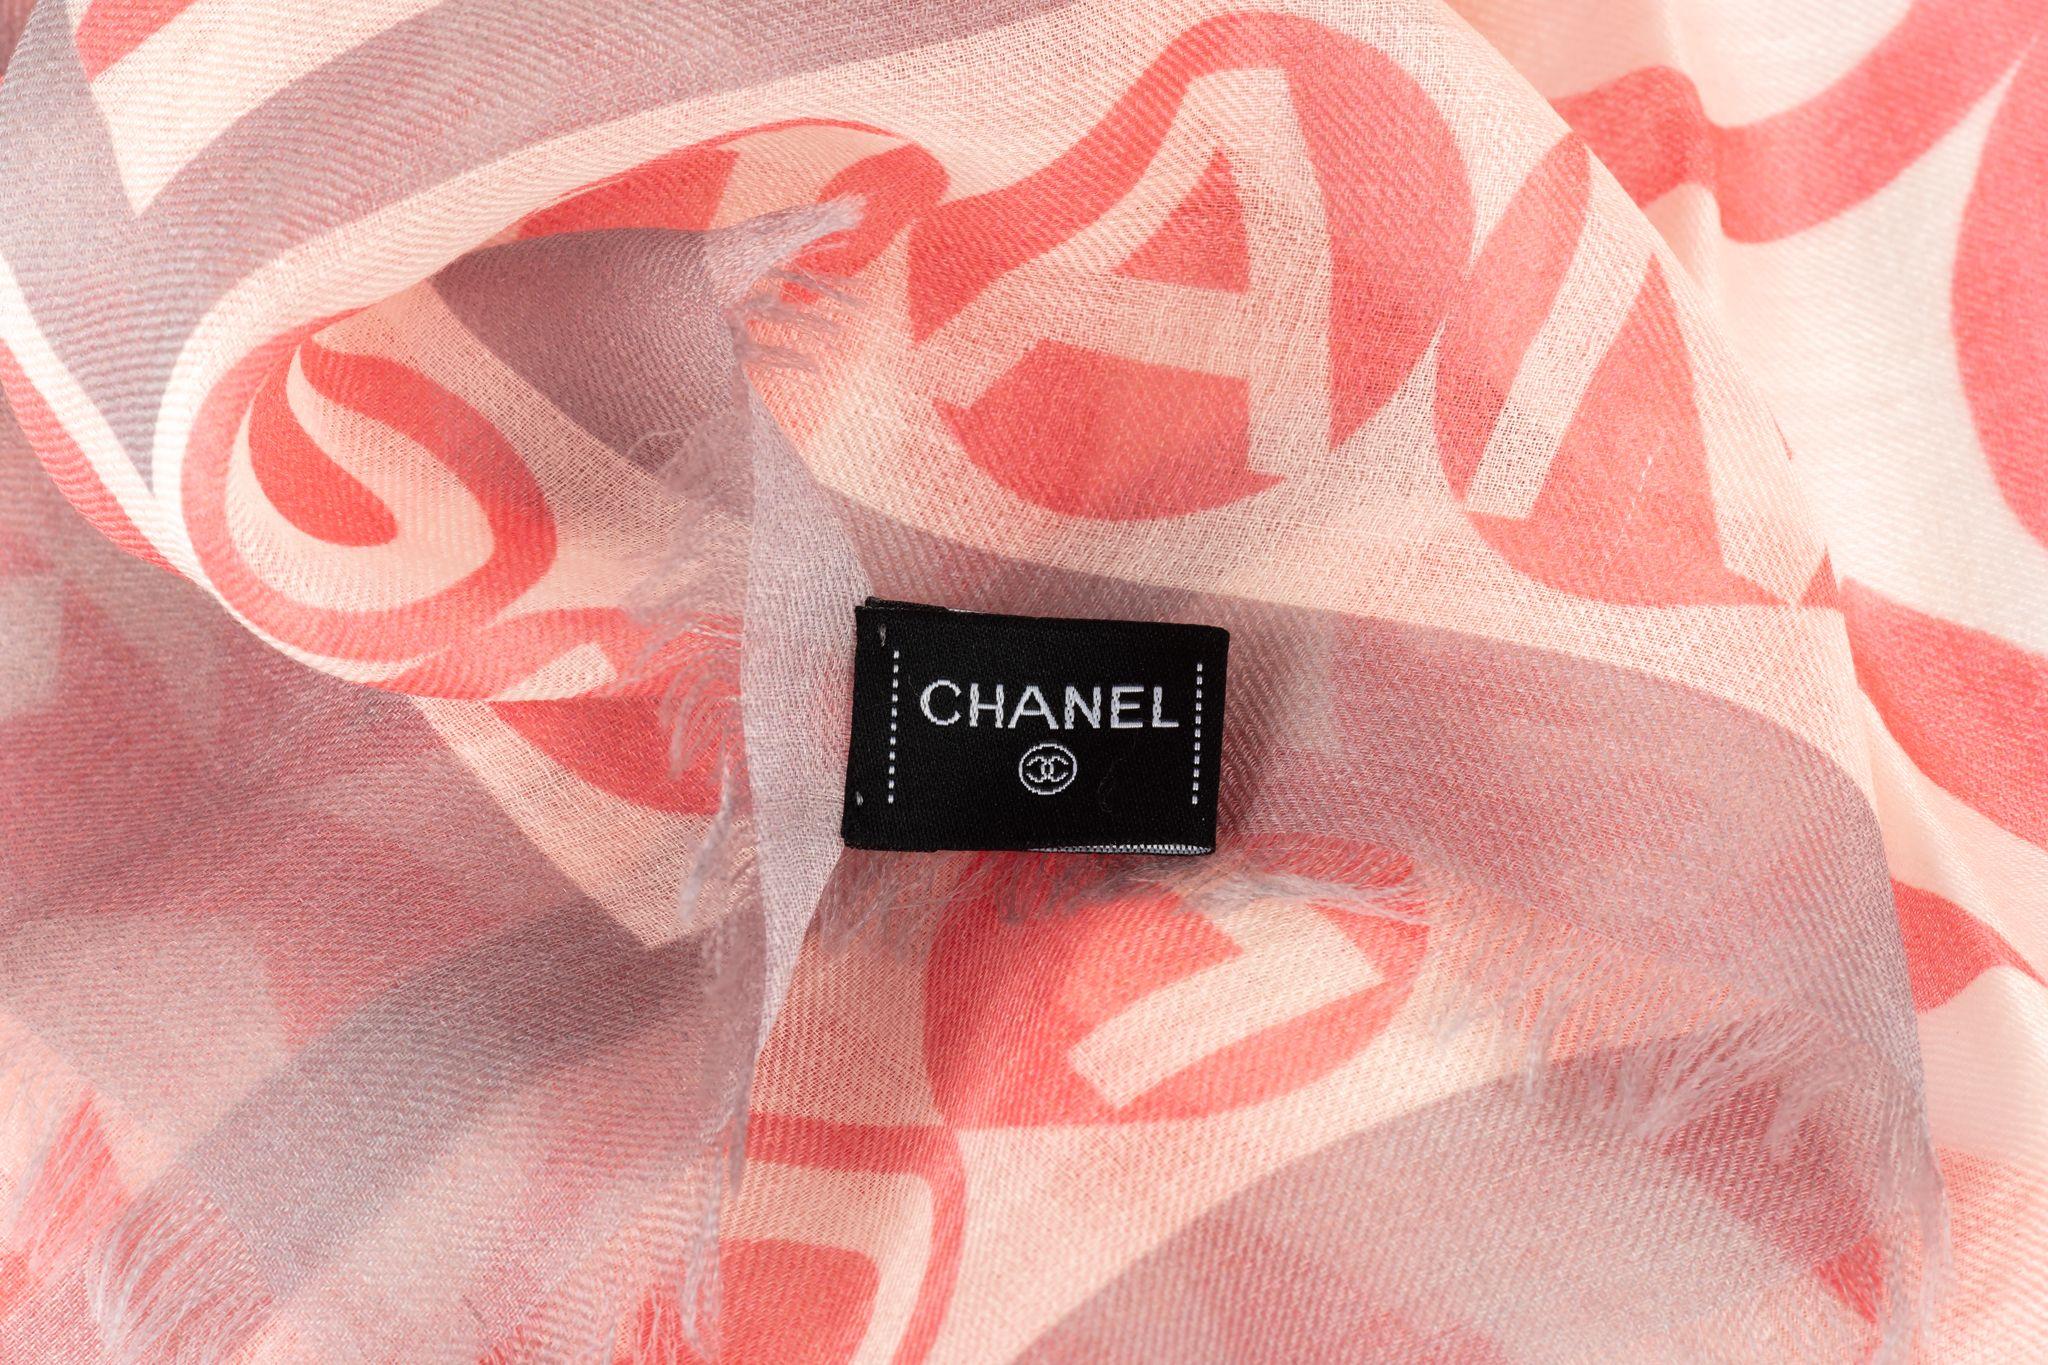 Chanel new multi lettering cashmere shawl. Pink, grey and white combination . Care tag attached.
